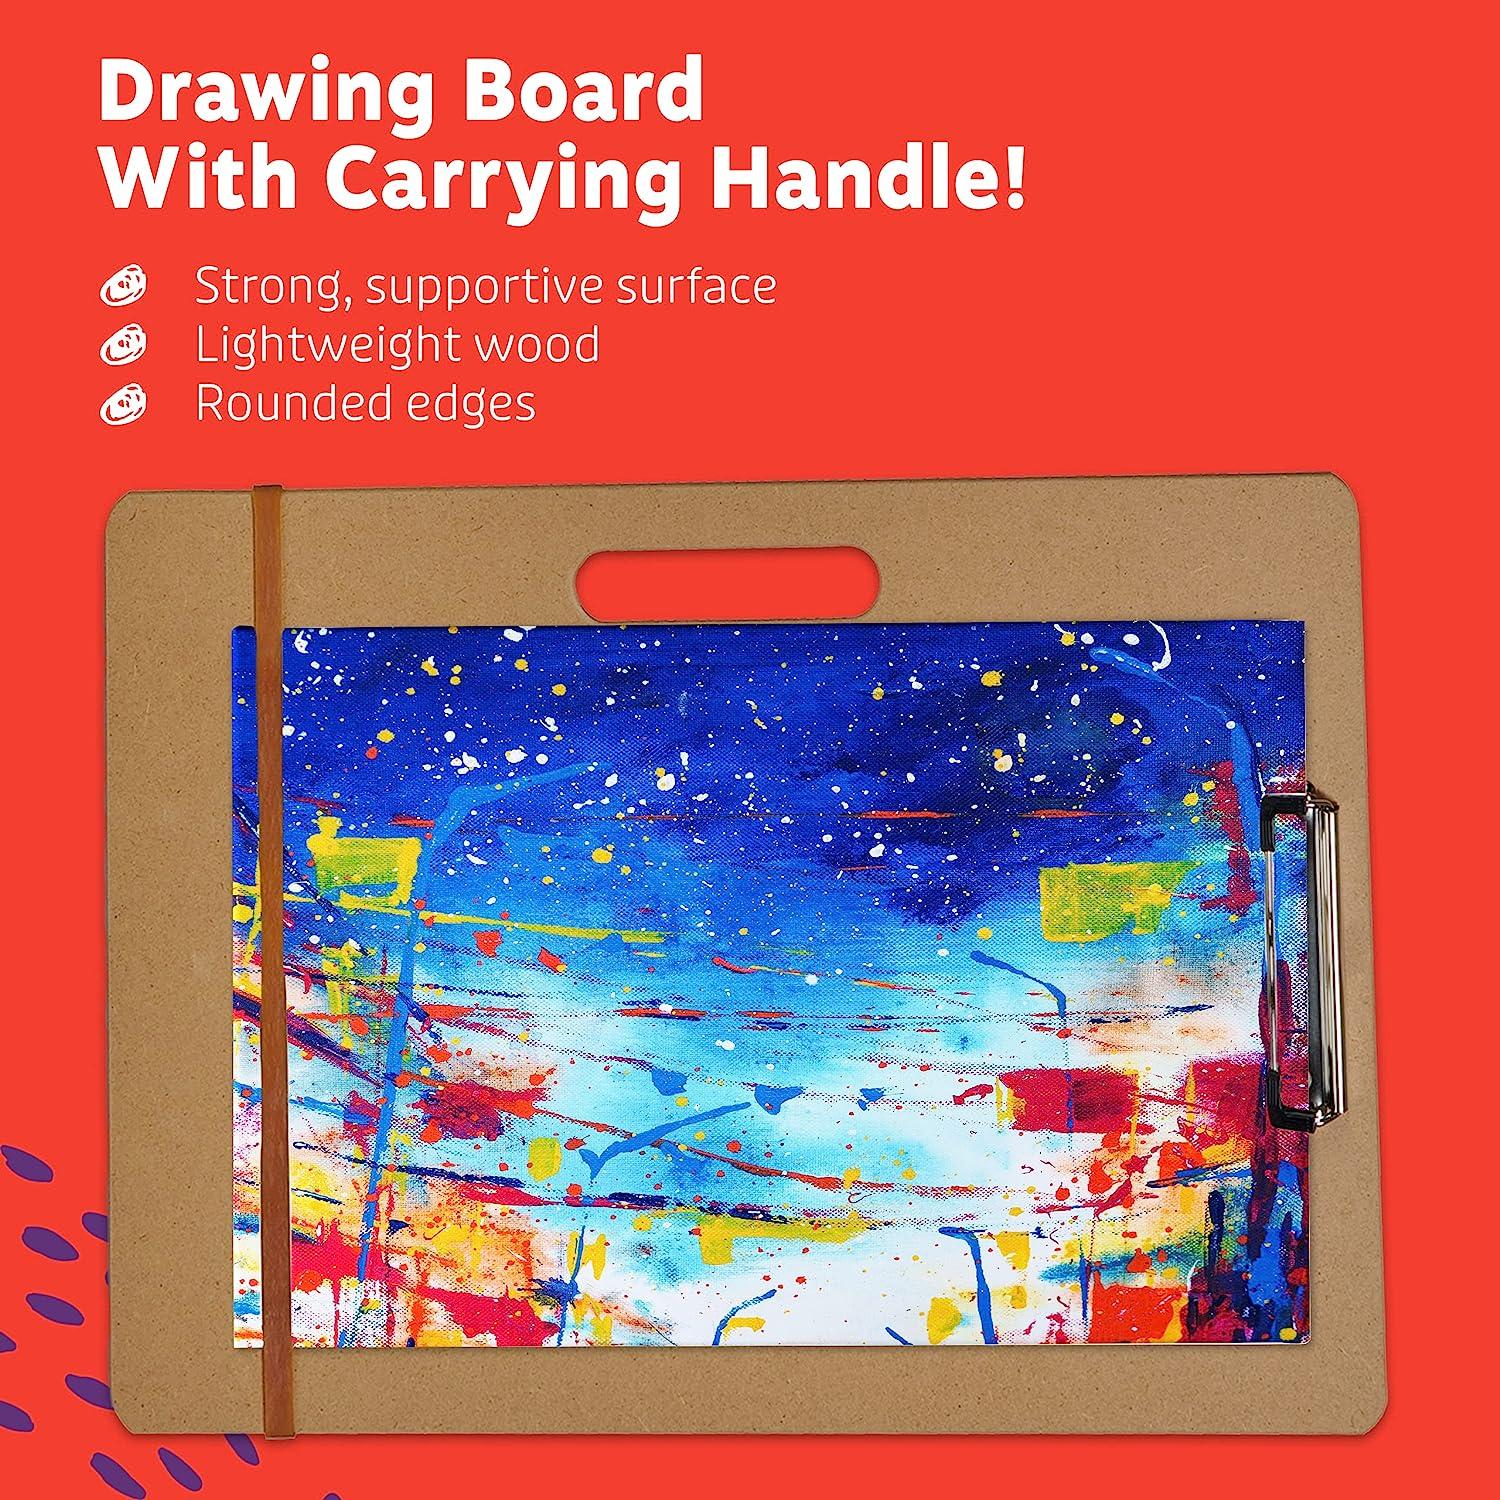 Artlicious Drawing Board - 13 x 17 Sketch Boards with Handle for Drafting  Art - Portable Wooden Clipboard for Class or Studio Fit in Artists Tote  13x17